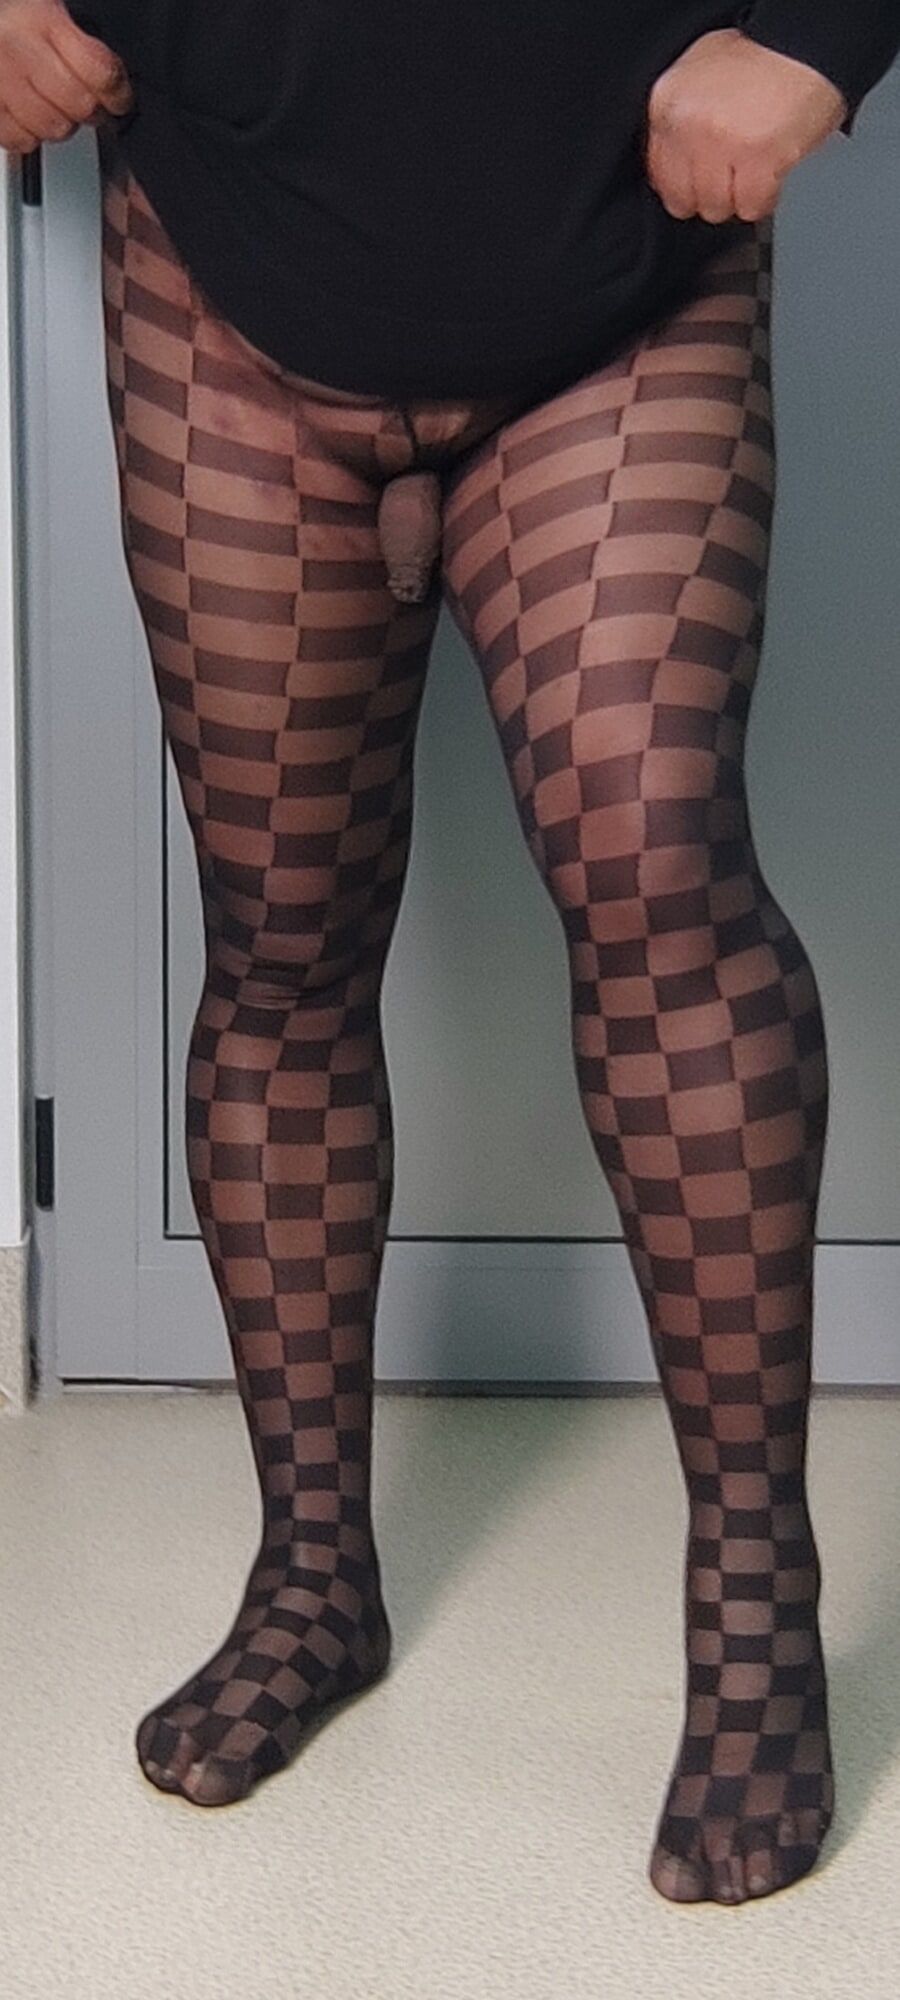 Black patterpantyhose on my sexy feet are so cool.Am i sexy? #18